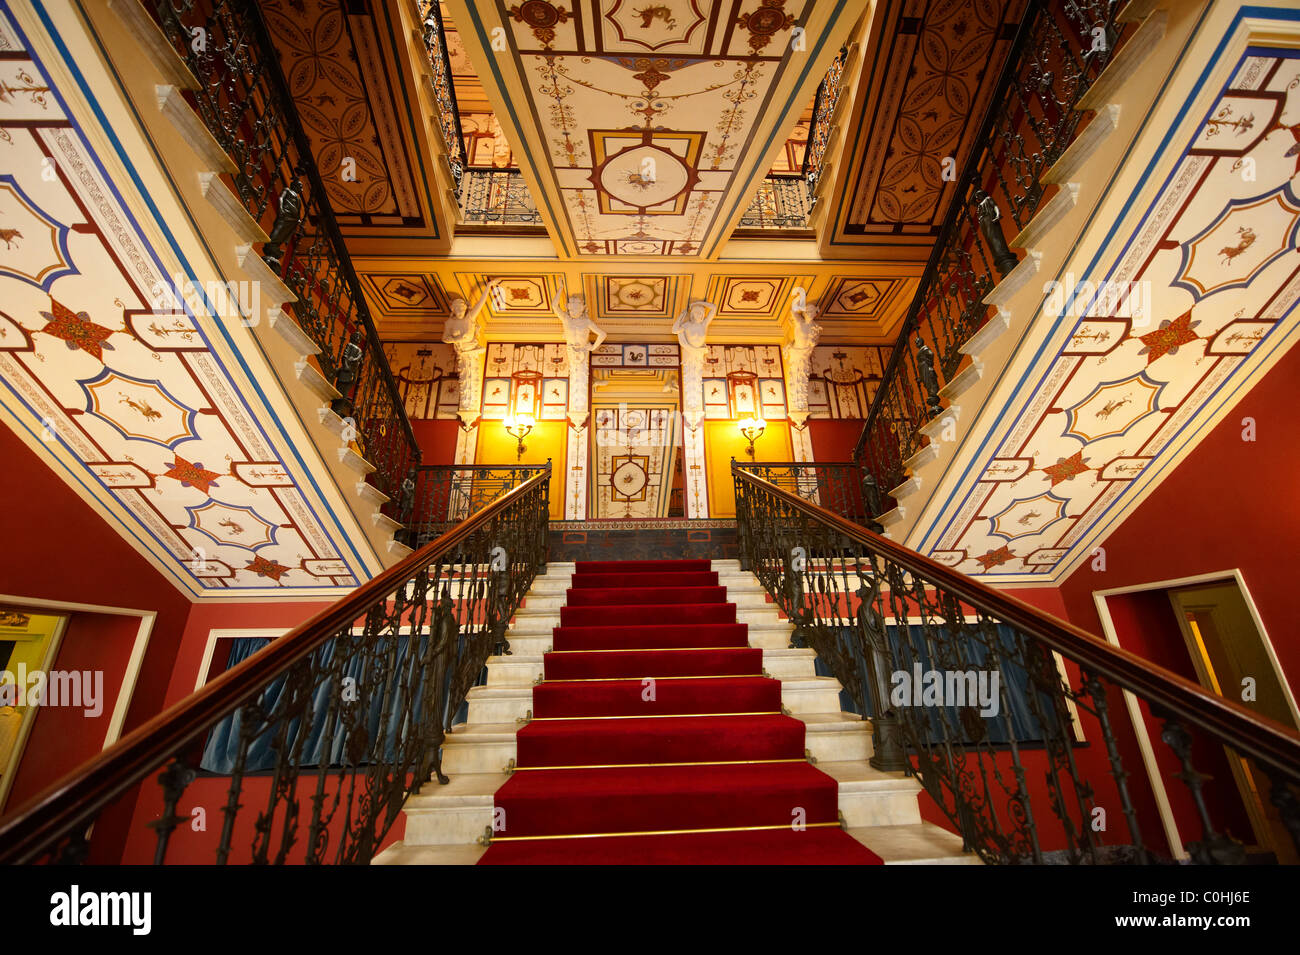 Stairway of the Achilleion [ Achilles, Αχίλλειο ] Palace [ 1890 built by Elizabeth [ Sissi ] Emperess of Austria Stock Photo